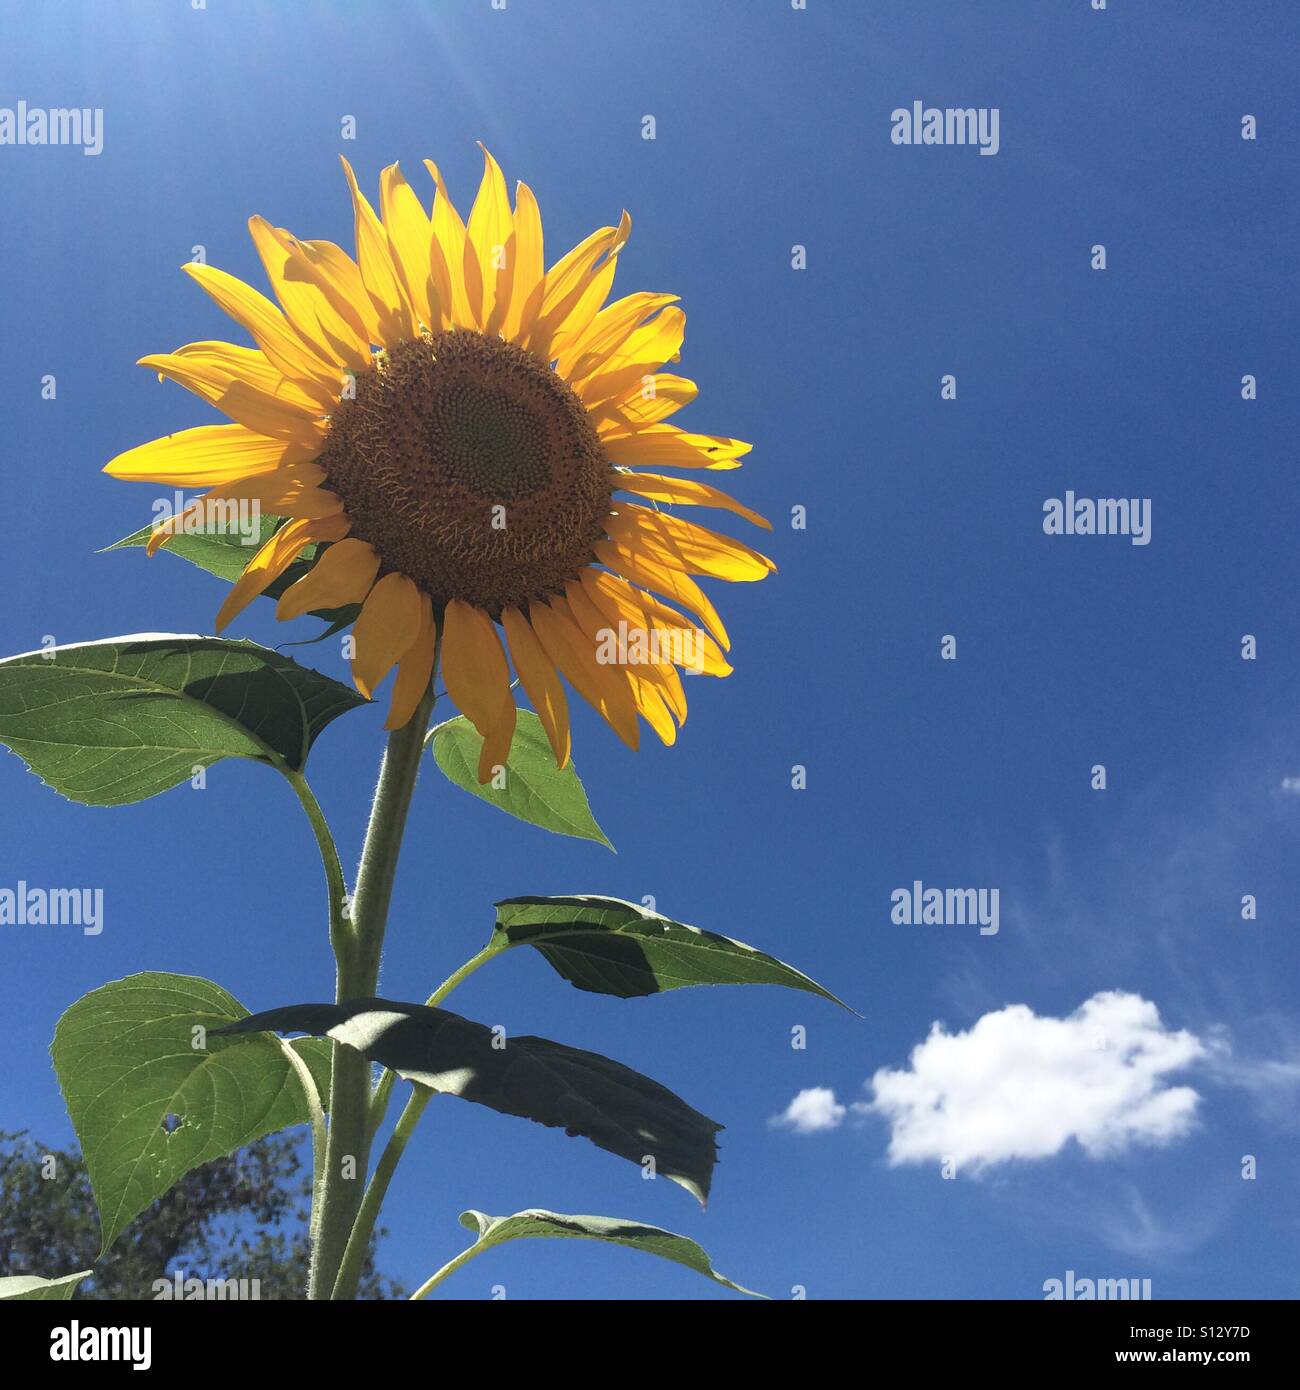 Sunflower in a summer sky. Stock Photo